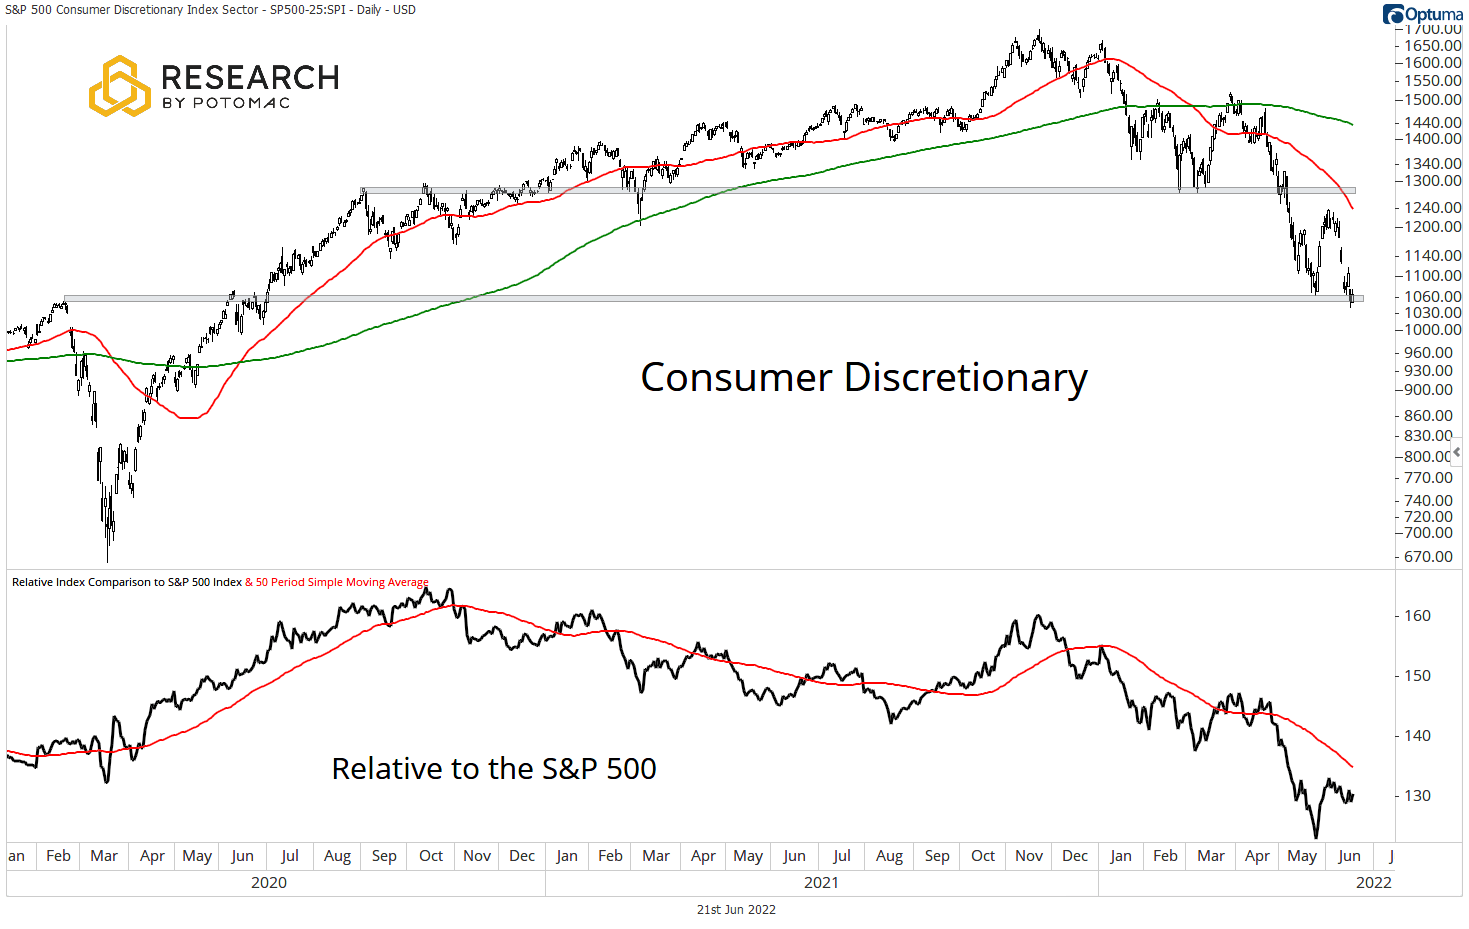 Discretionary / Staples (EW) chart for March 25th research.